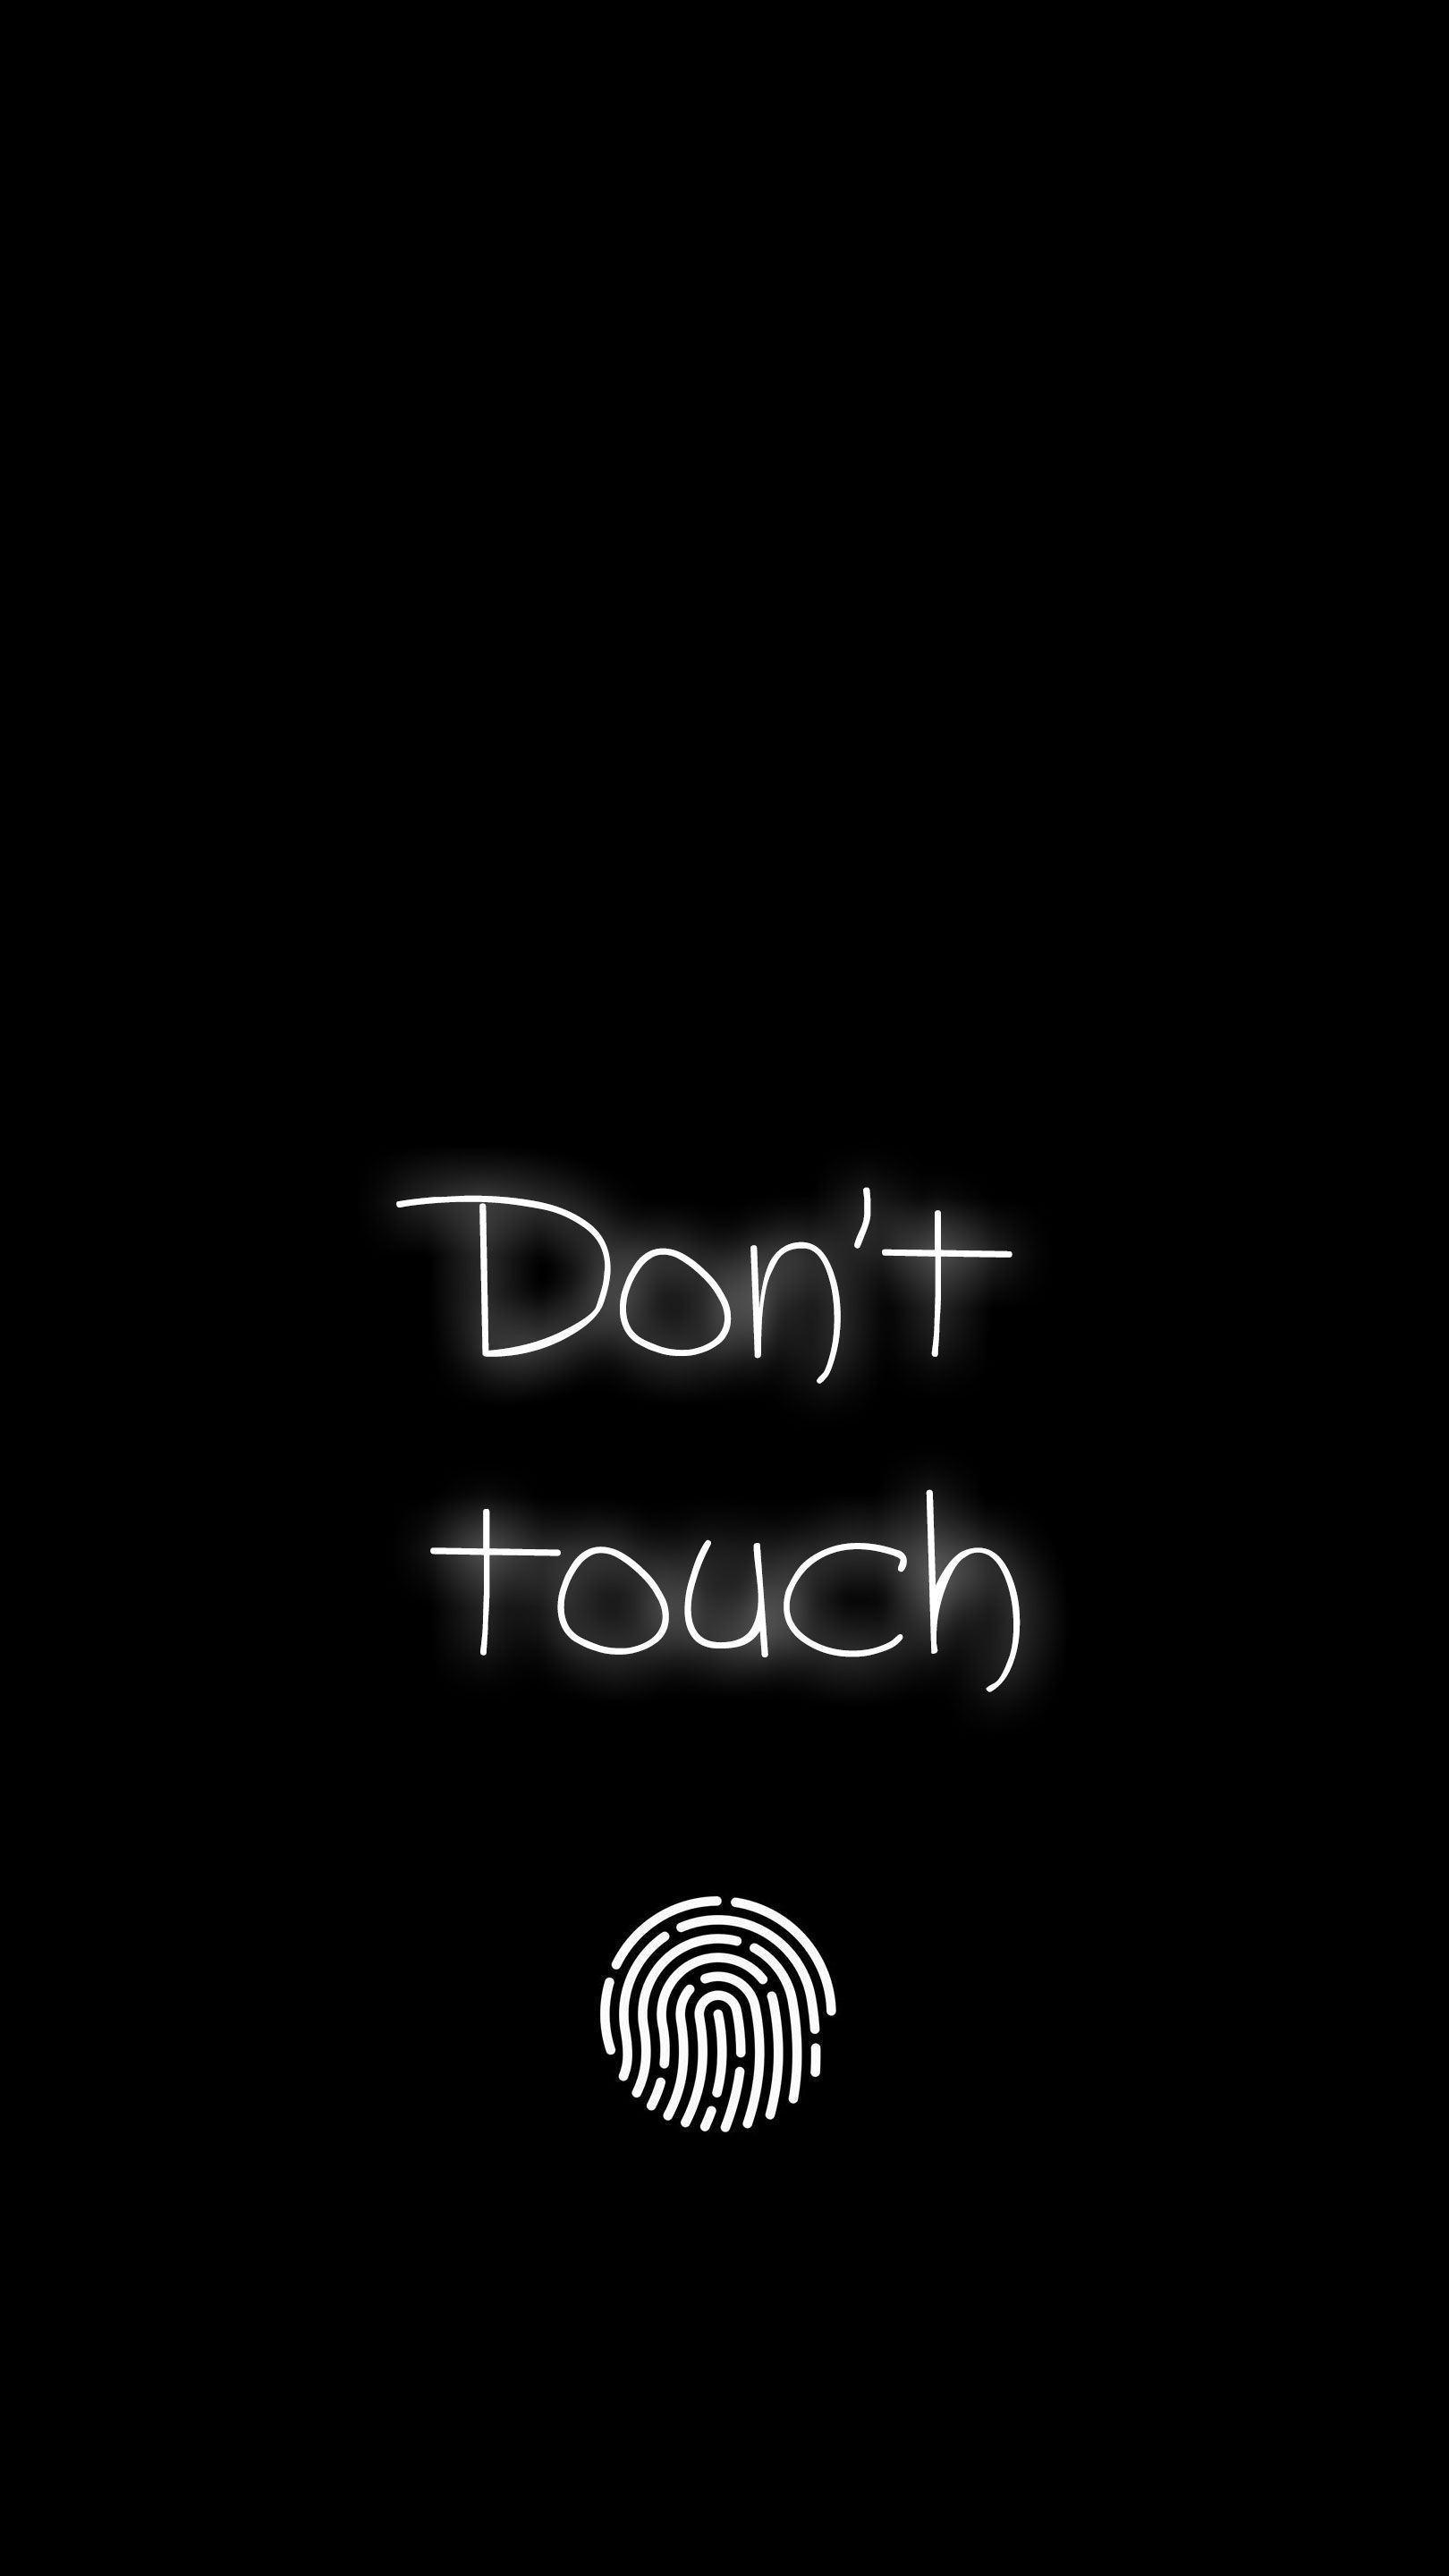 Dont Touch iPhone Wallpaper. Funny phone wallpaper, Lock screen wallpaper iphone, Black phone wallpaper